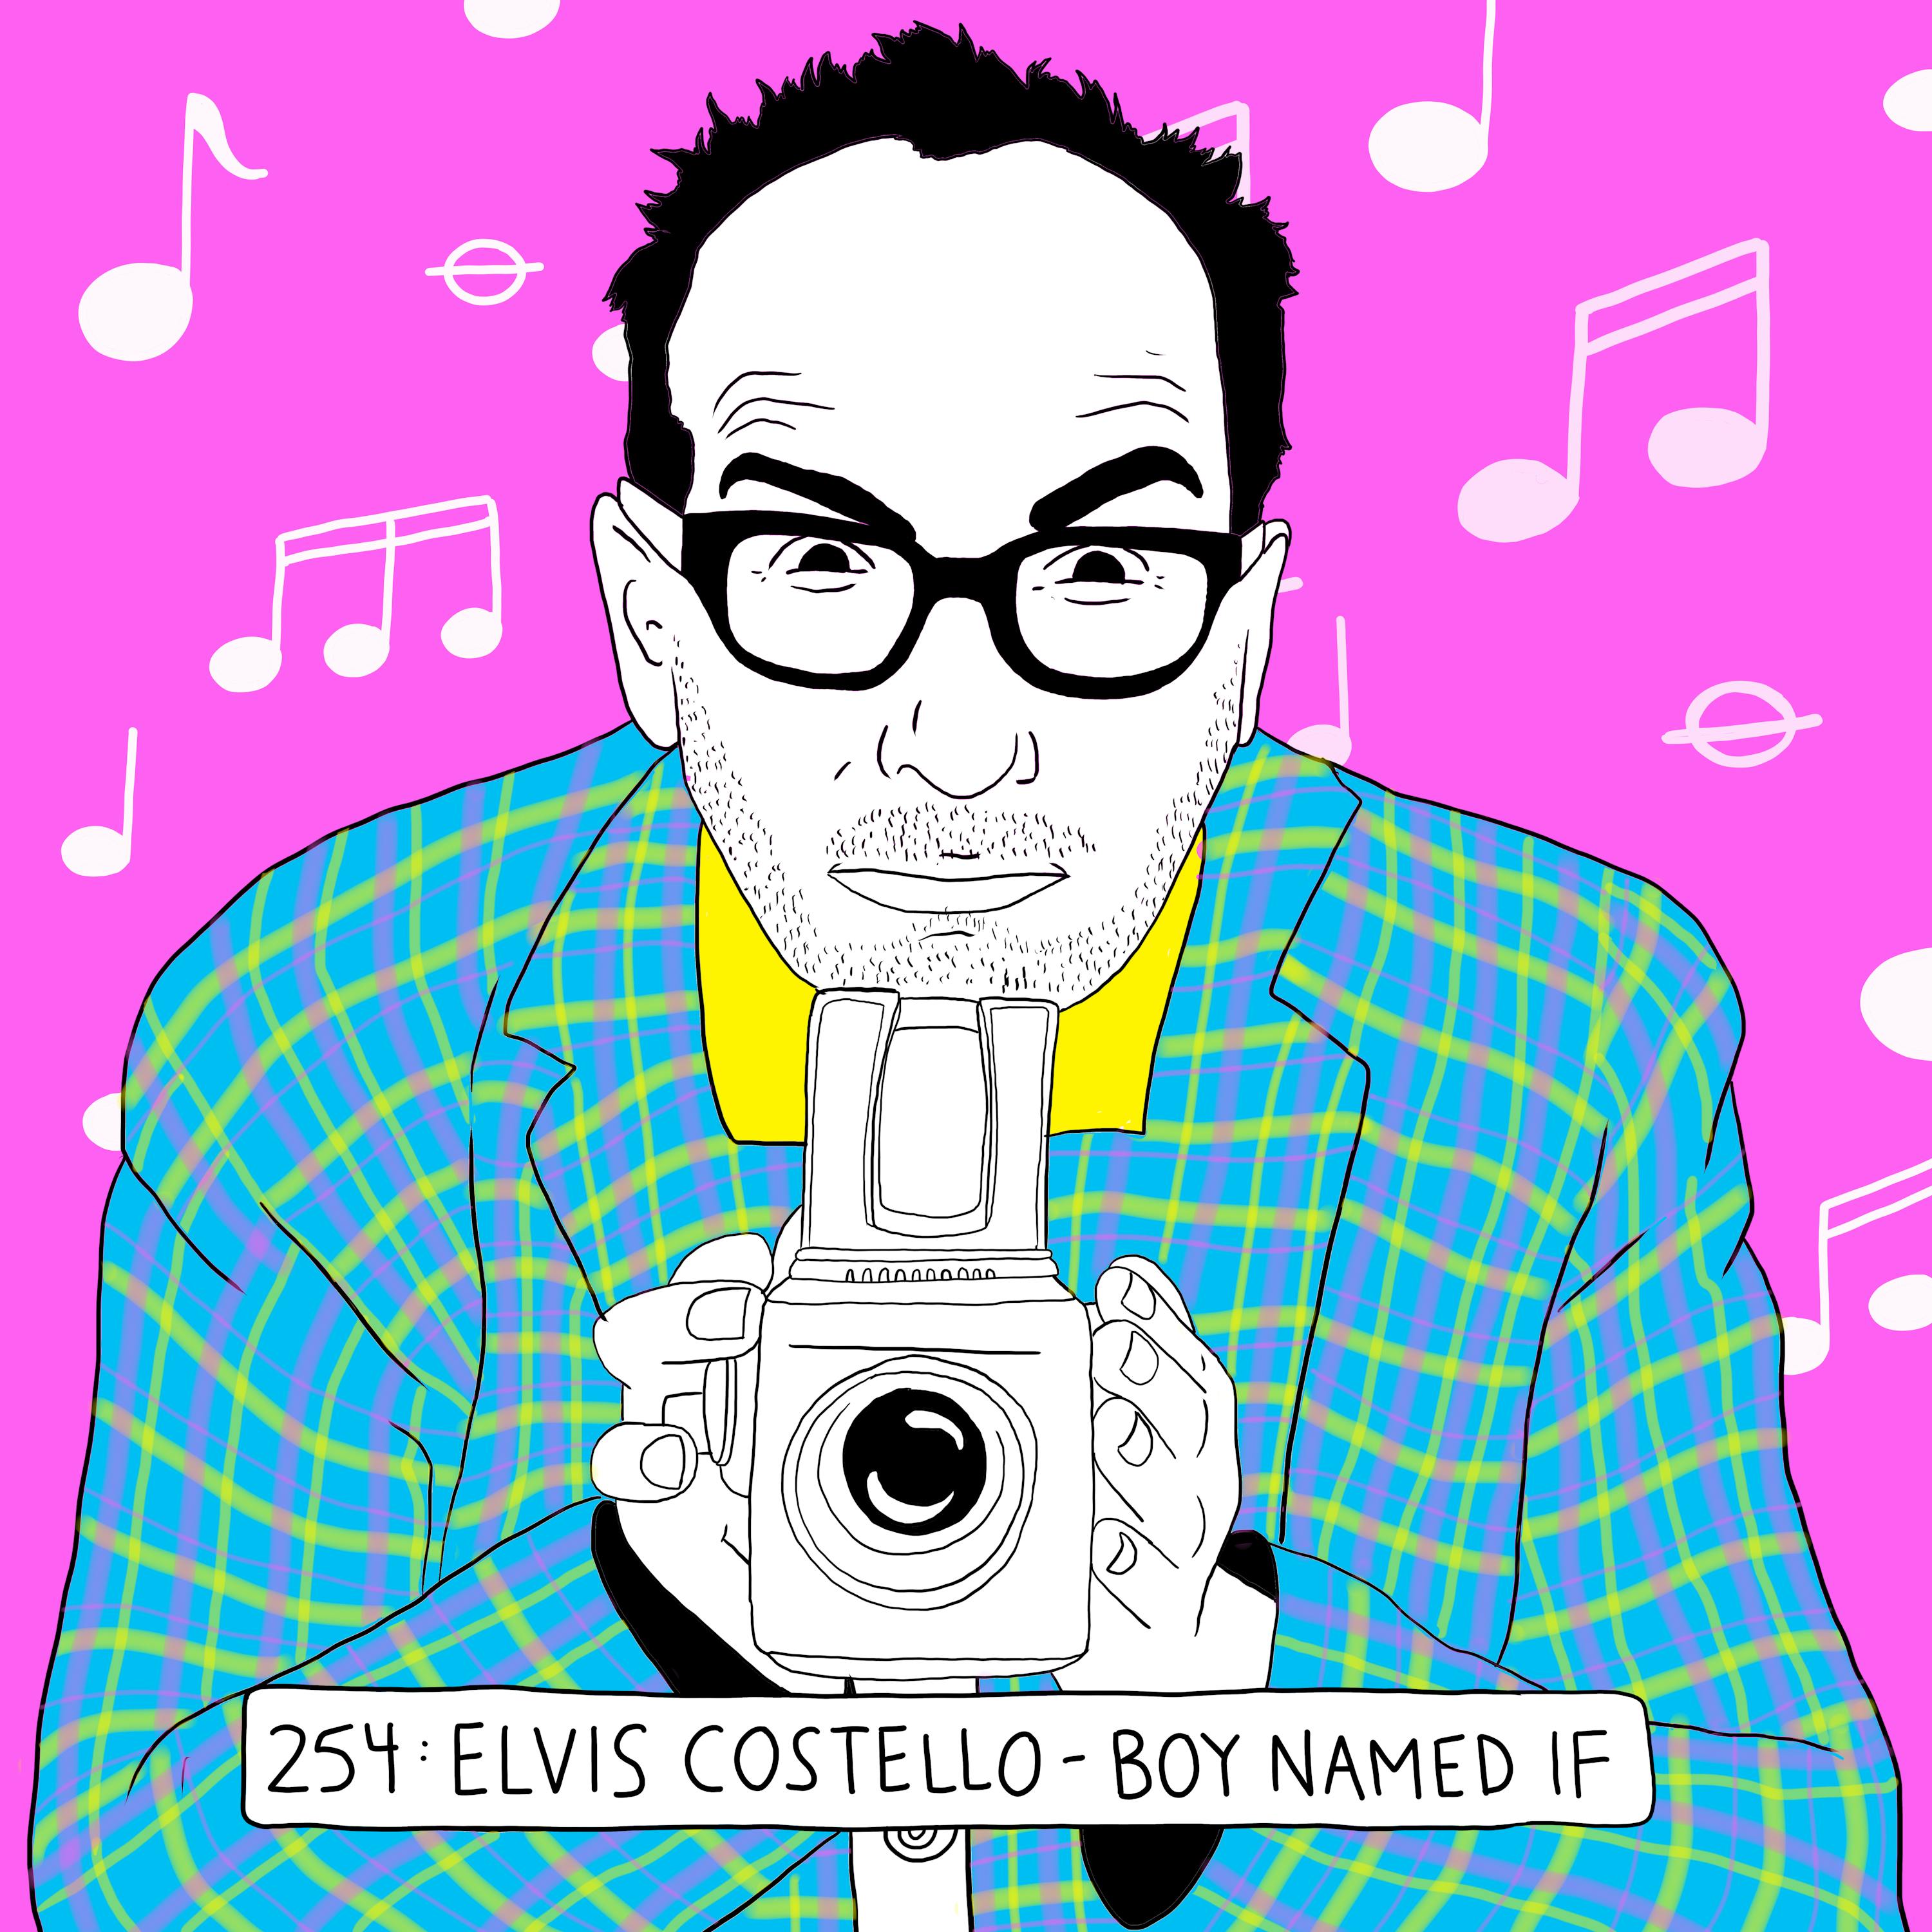 32 Albums in, Elvis Costello is Just Getting Started